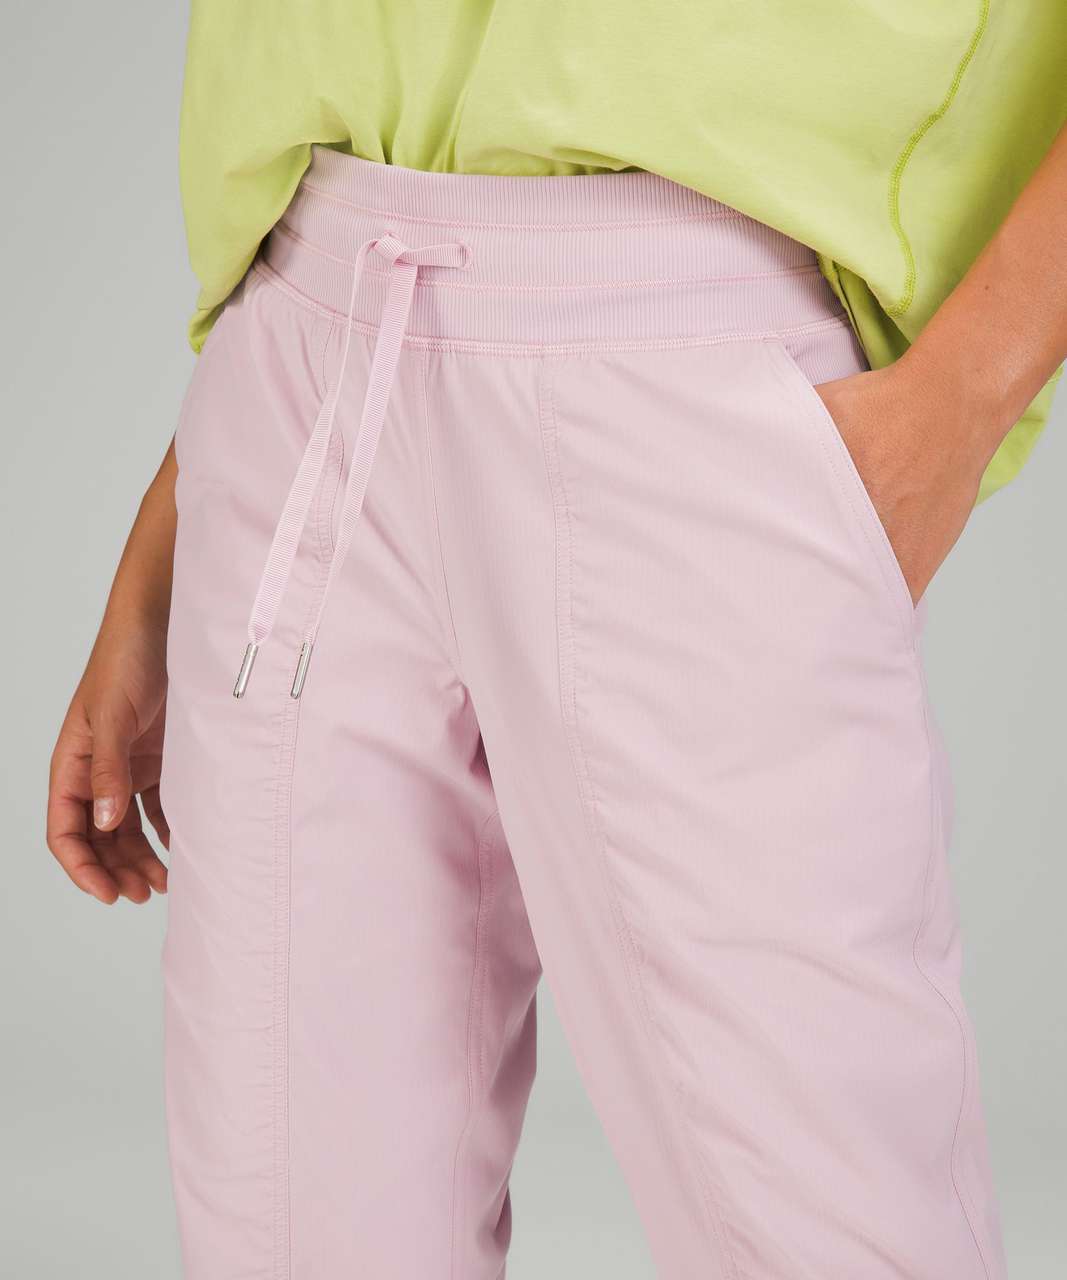 Run, don't walk to get the dance studio joggers in sonic pink